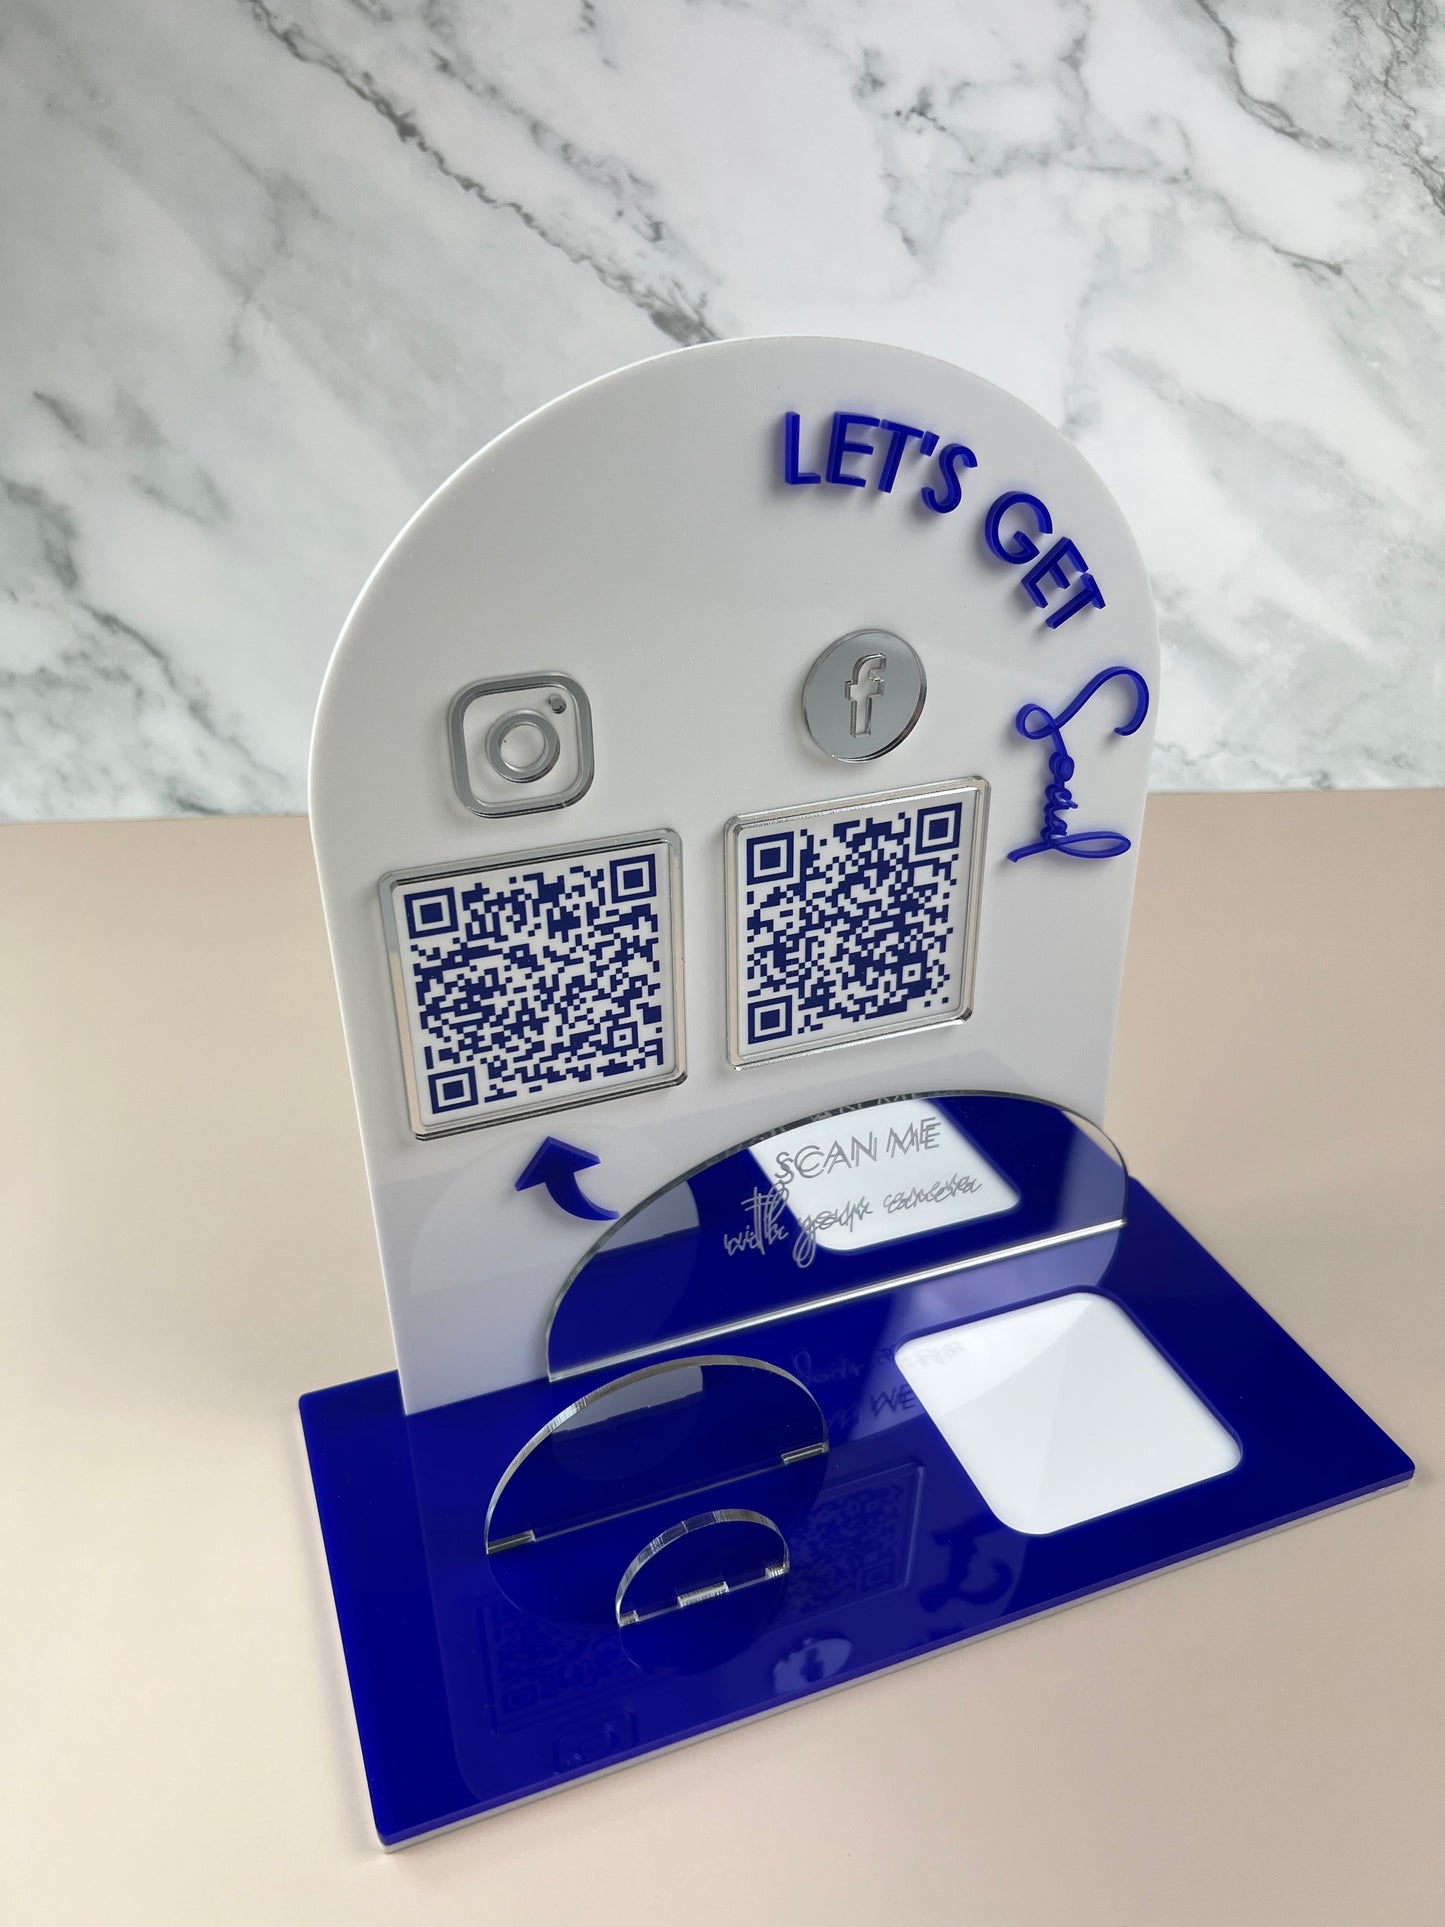 Social Media Sign with Square Reader + Business Card Holder (Arch)